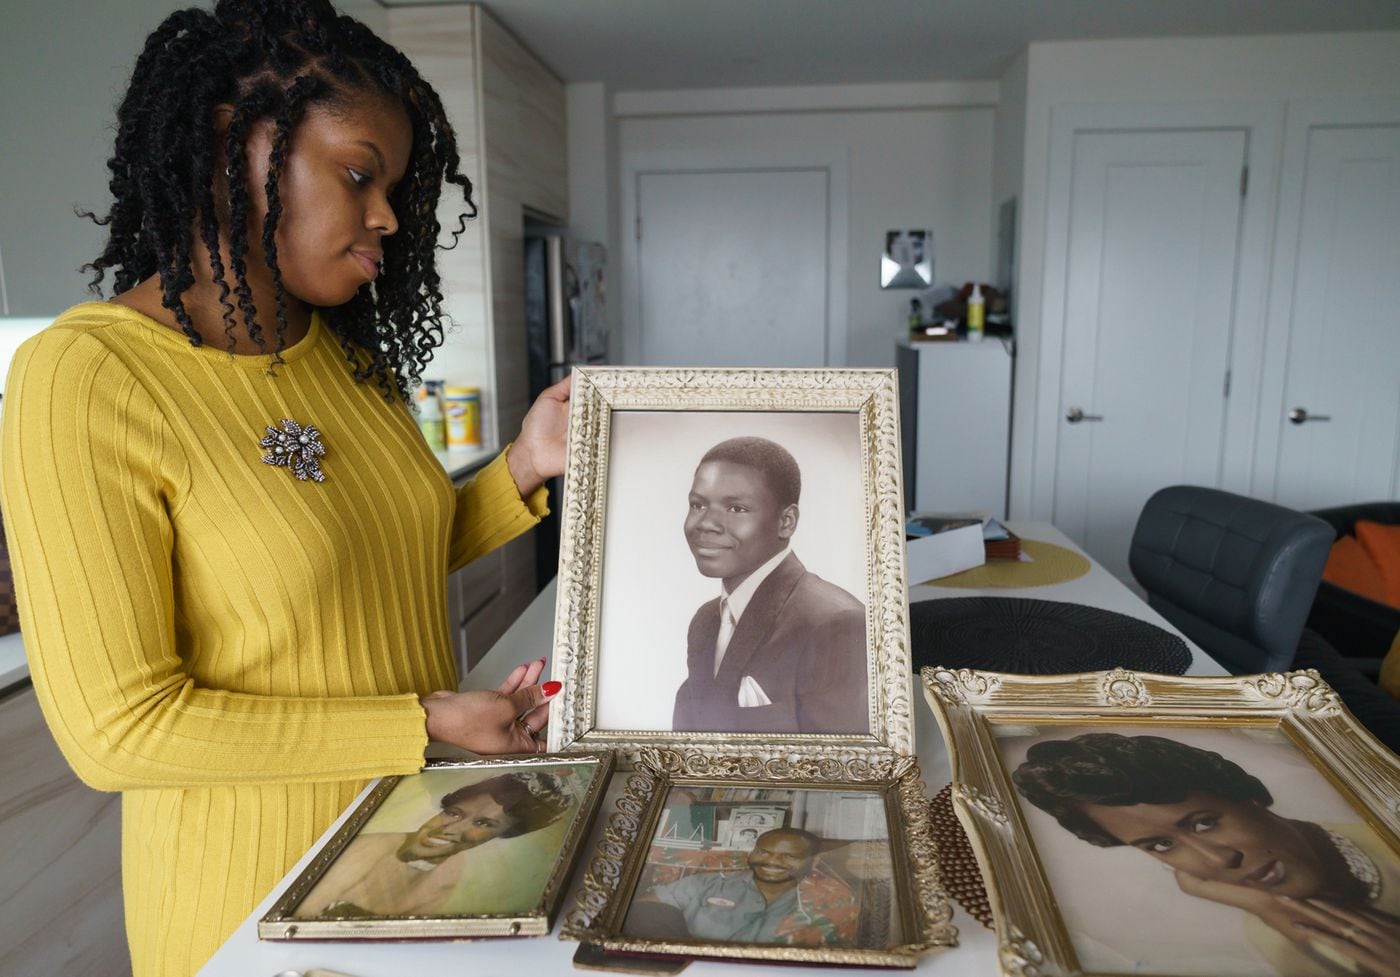 Vaneeda Days, the great-niece of Dorothy Beam, holds a photograph of Joseph Beam, who was a trailblazing black gay author from Philadelphia.